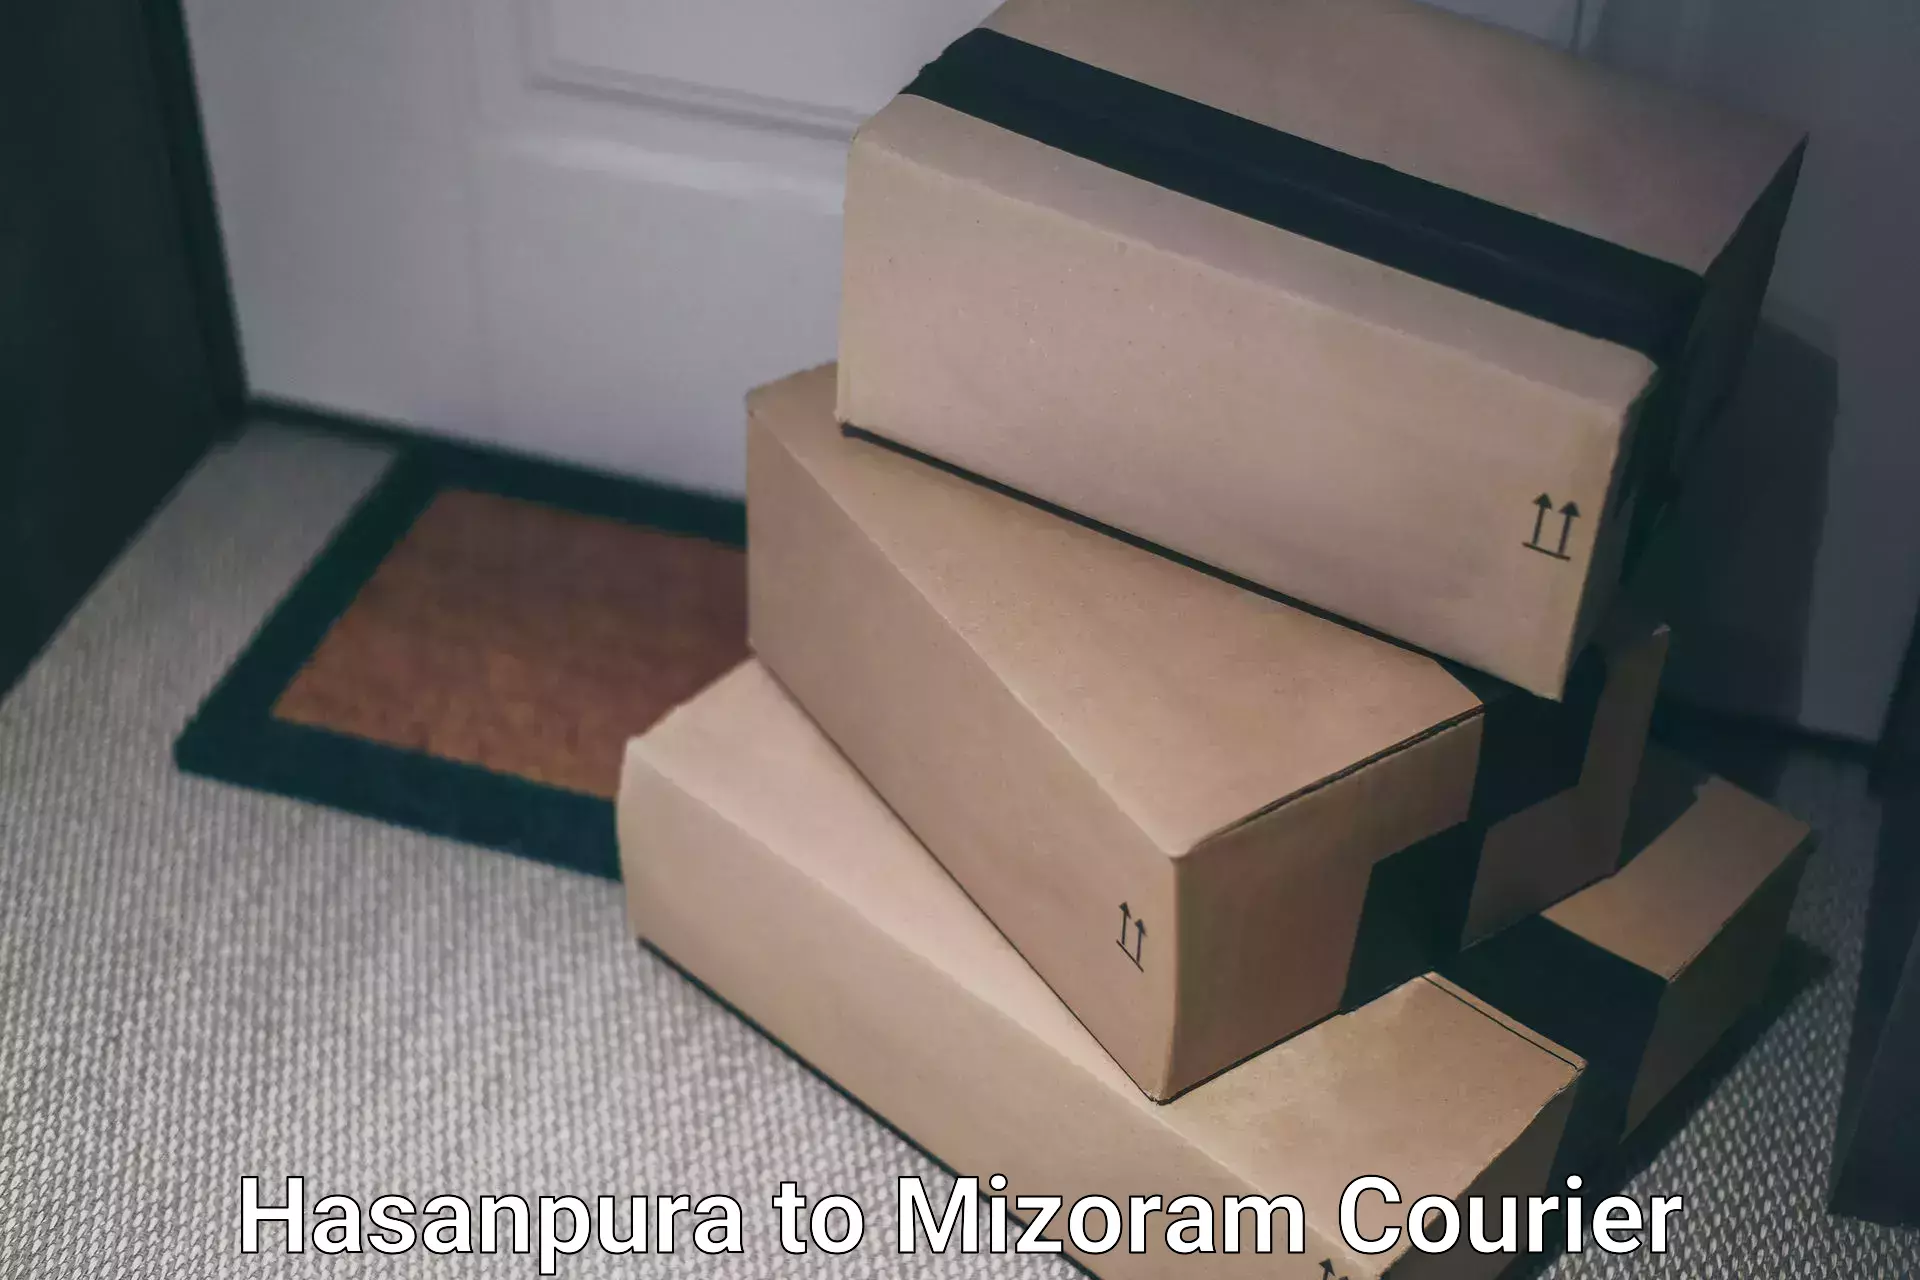 Multi-package shipping Hasanpura to Darlawn